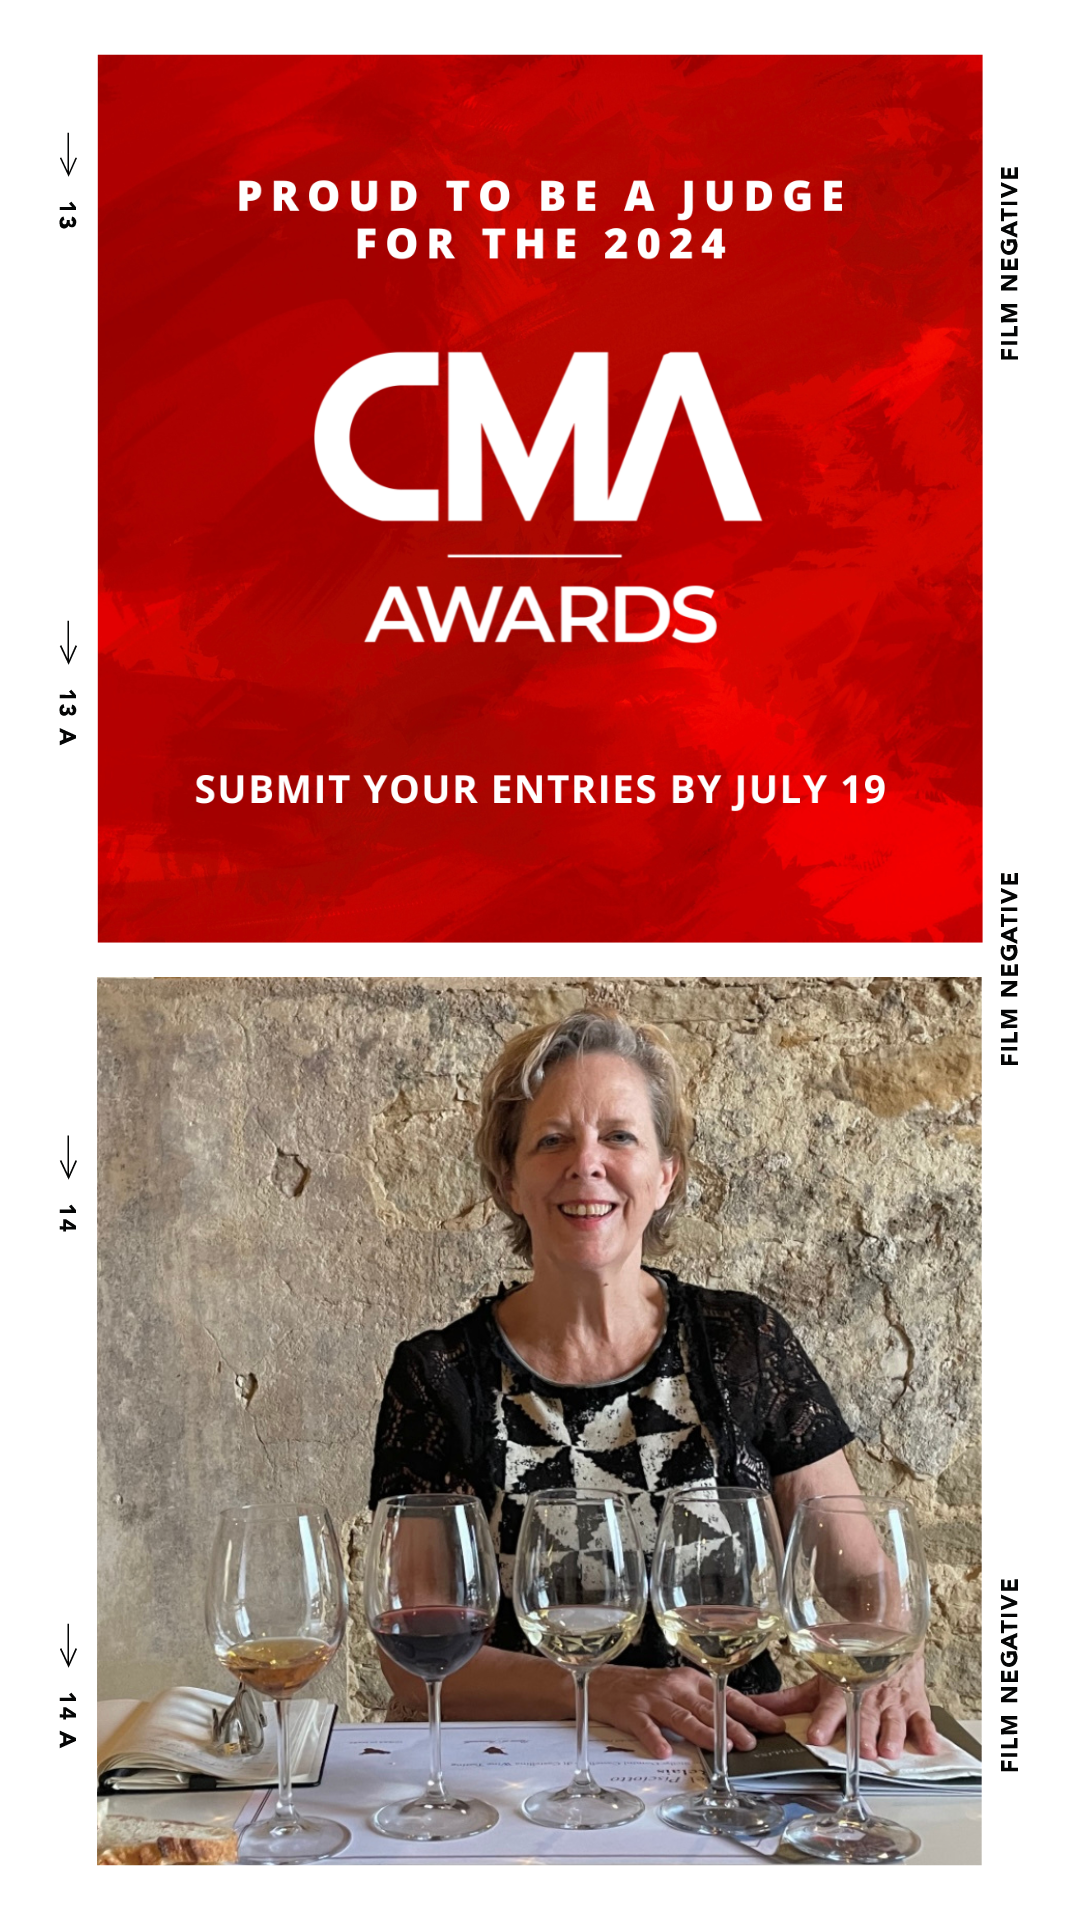 Liz Palmer Selected as “Final Round Judge” for the 2024 Canadian Marketing Association’s CMA Awards